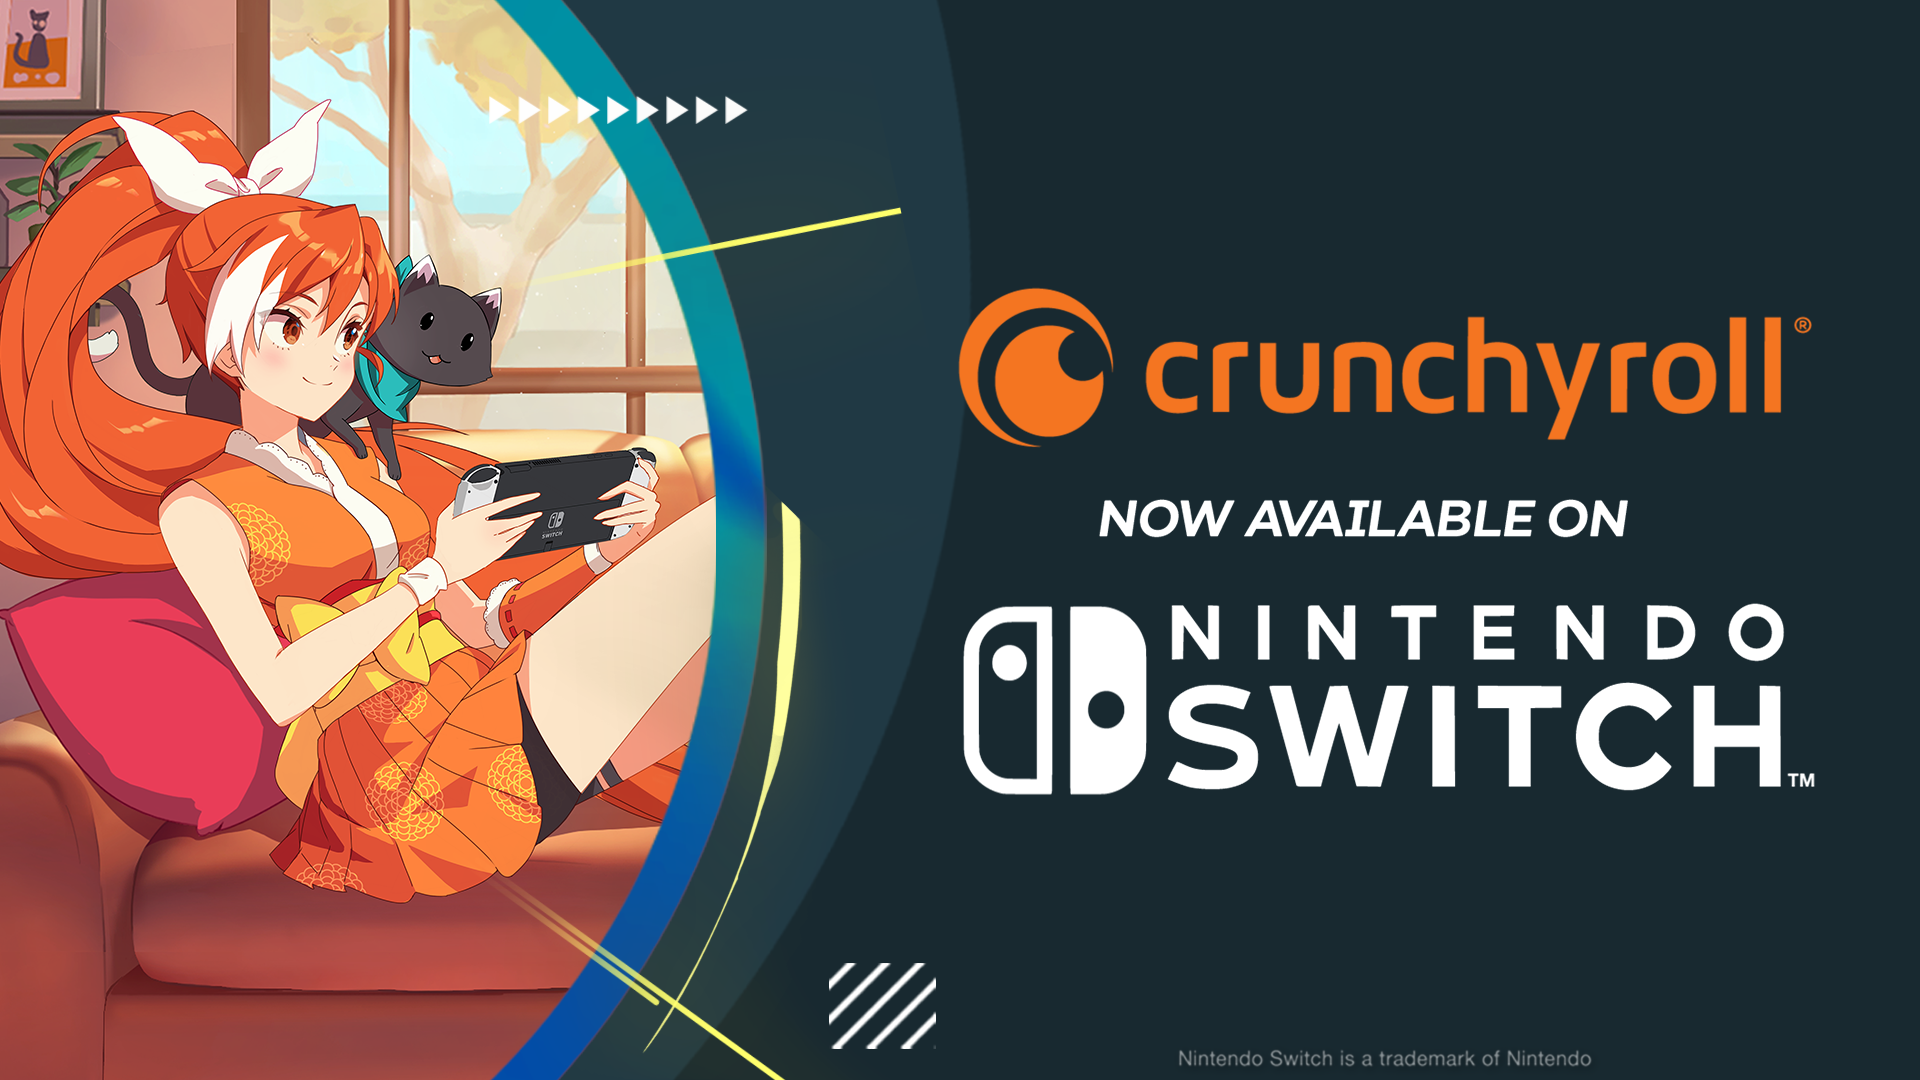 Crunchyroll graphic announcing that the app is available for Nintendo Switch.